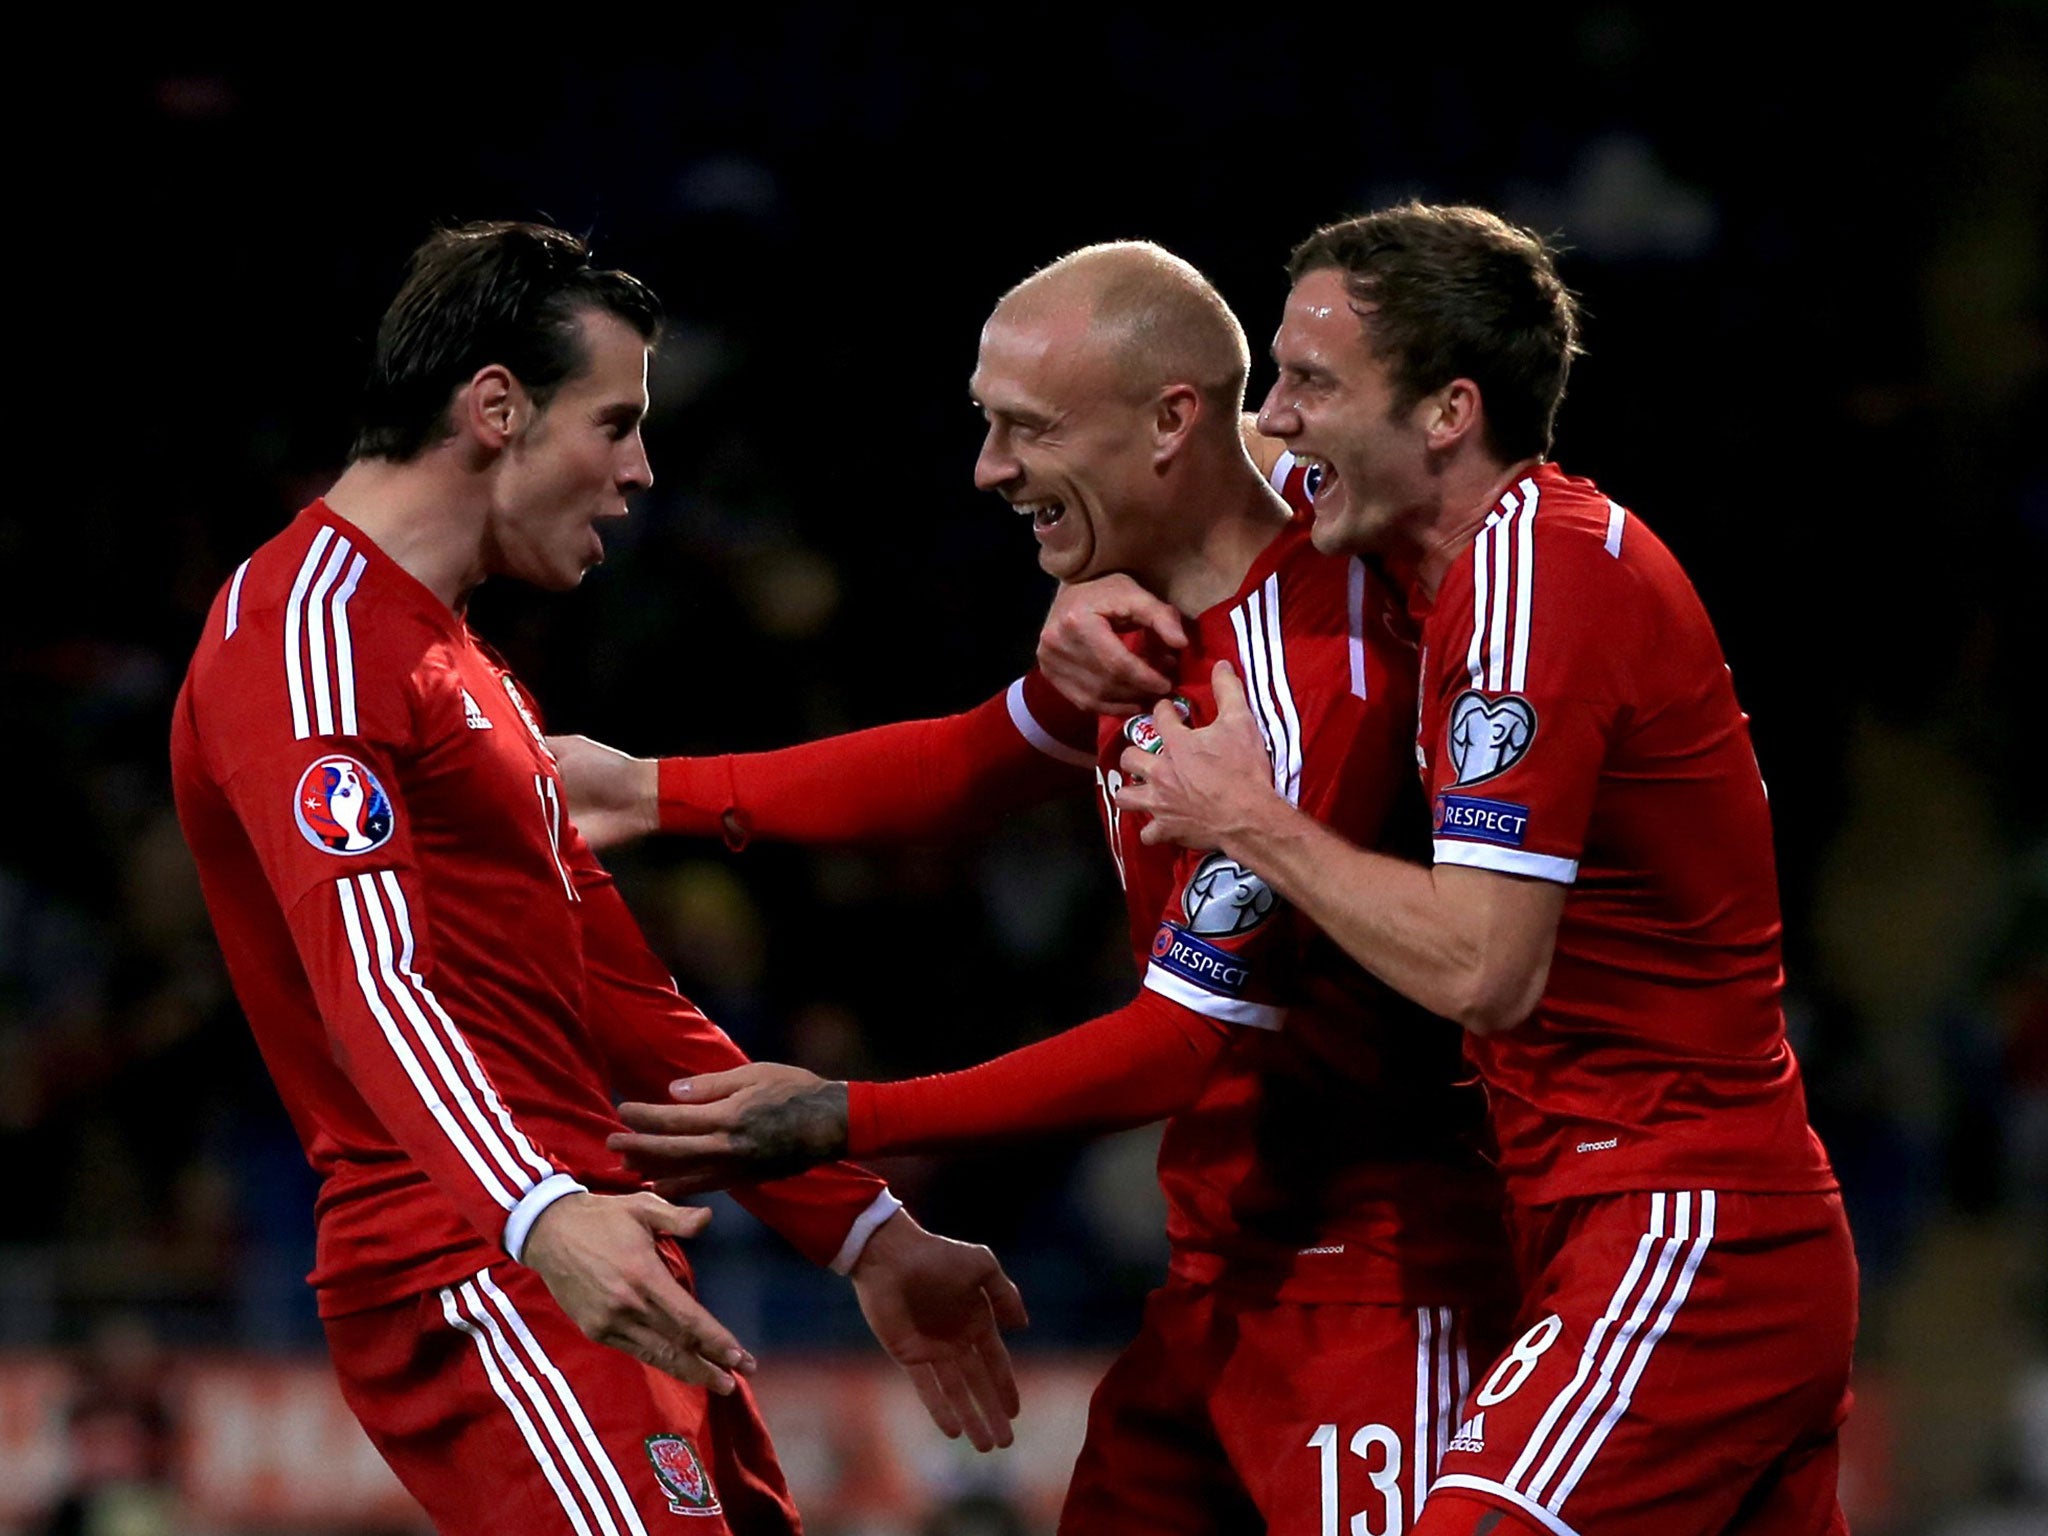 David Cotterill celebrates his goal with Gareth Bale (left) and Andy King (right)